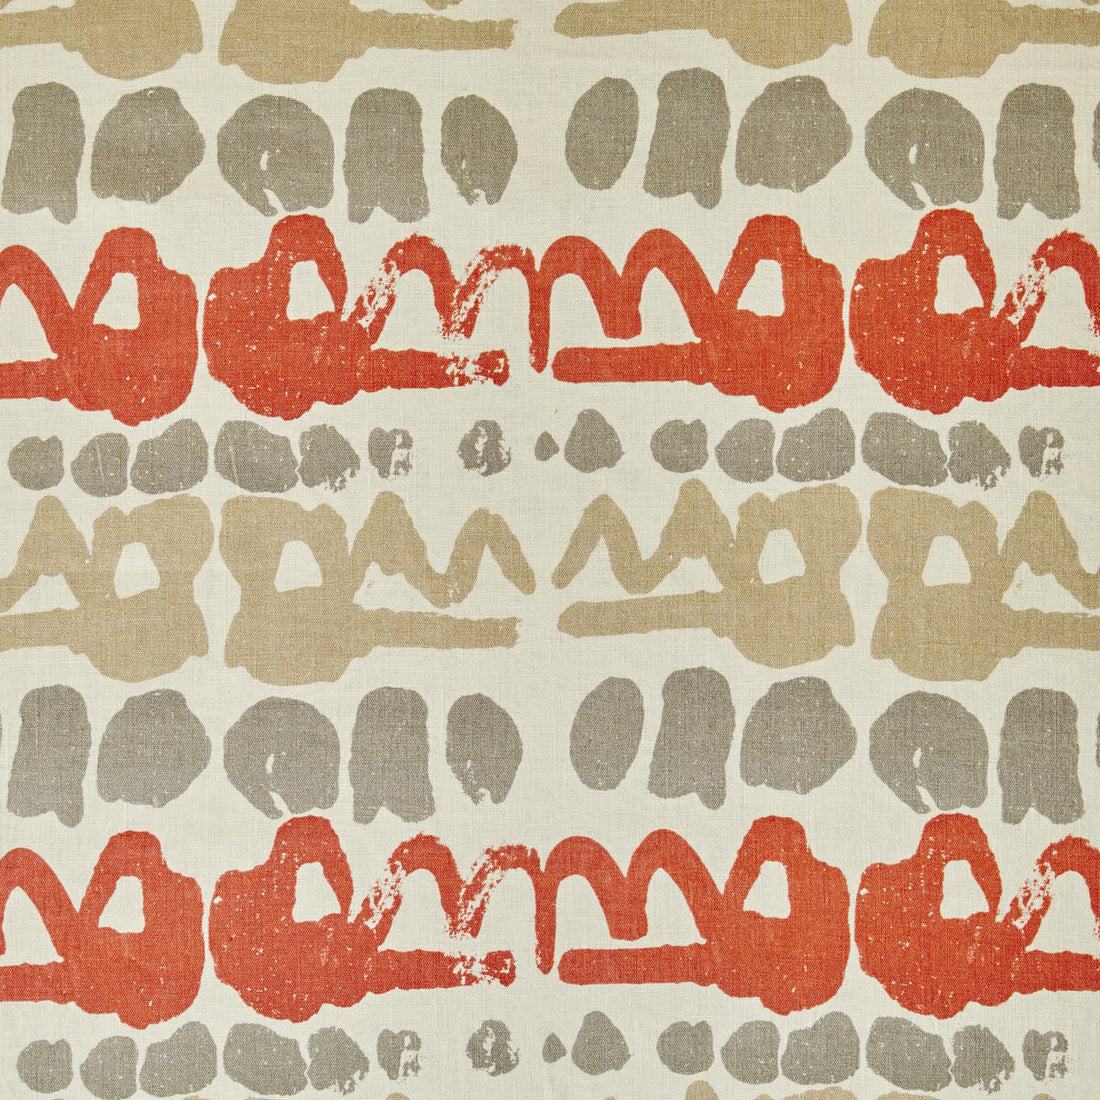 Altamira fabric in red/grey color - pattern BFC-3649.1121.0 - by Lee Jofa in the Blithfield collection